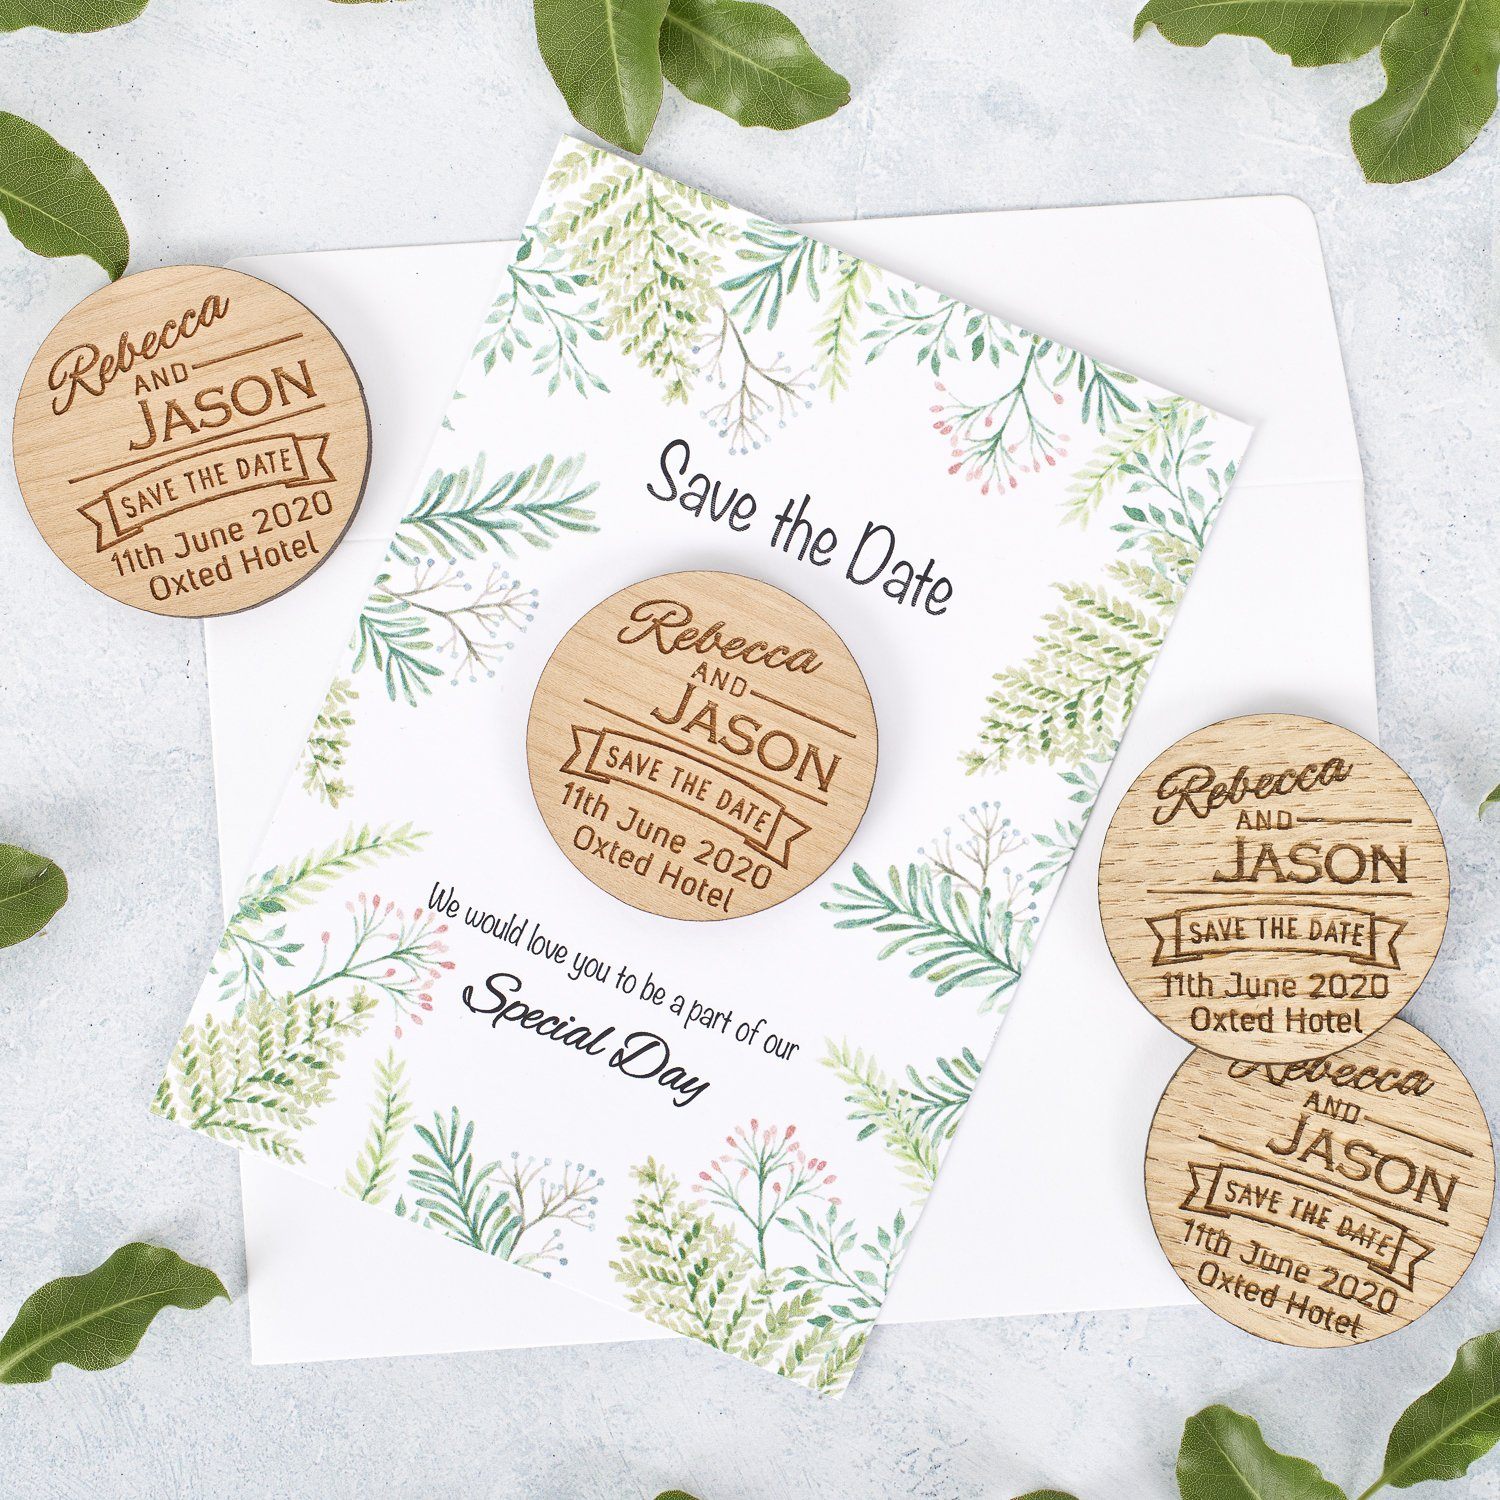 Save The Date Magnet With Cards - Save The Date Magnet Wooden Rustic & Cards - Banner